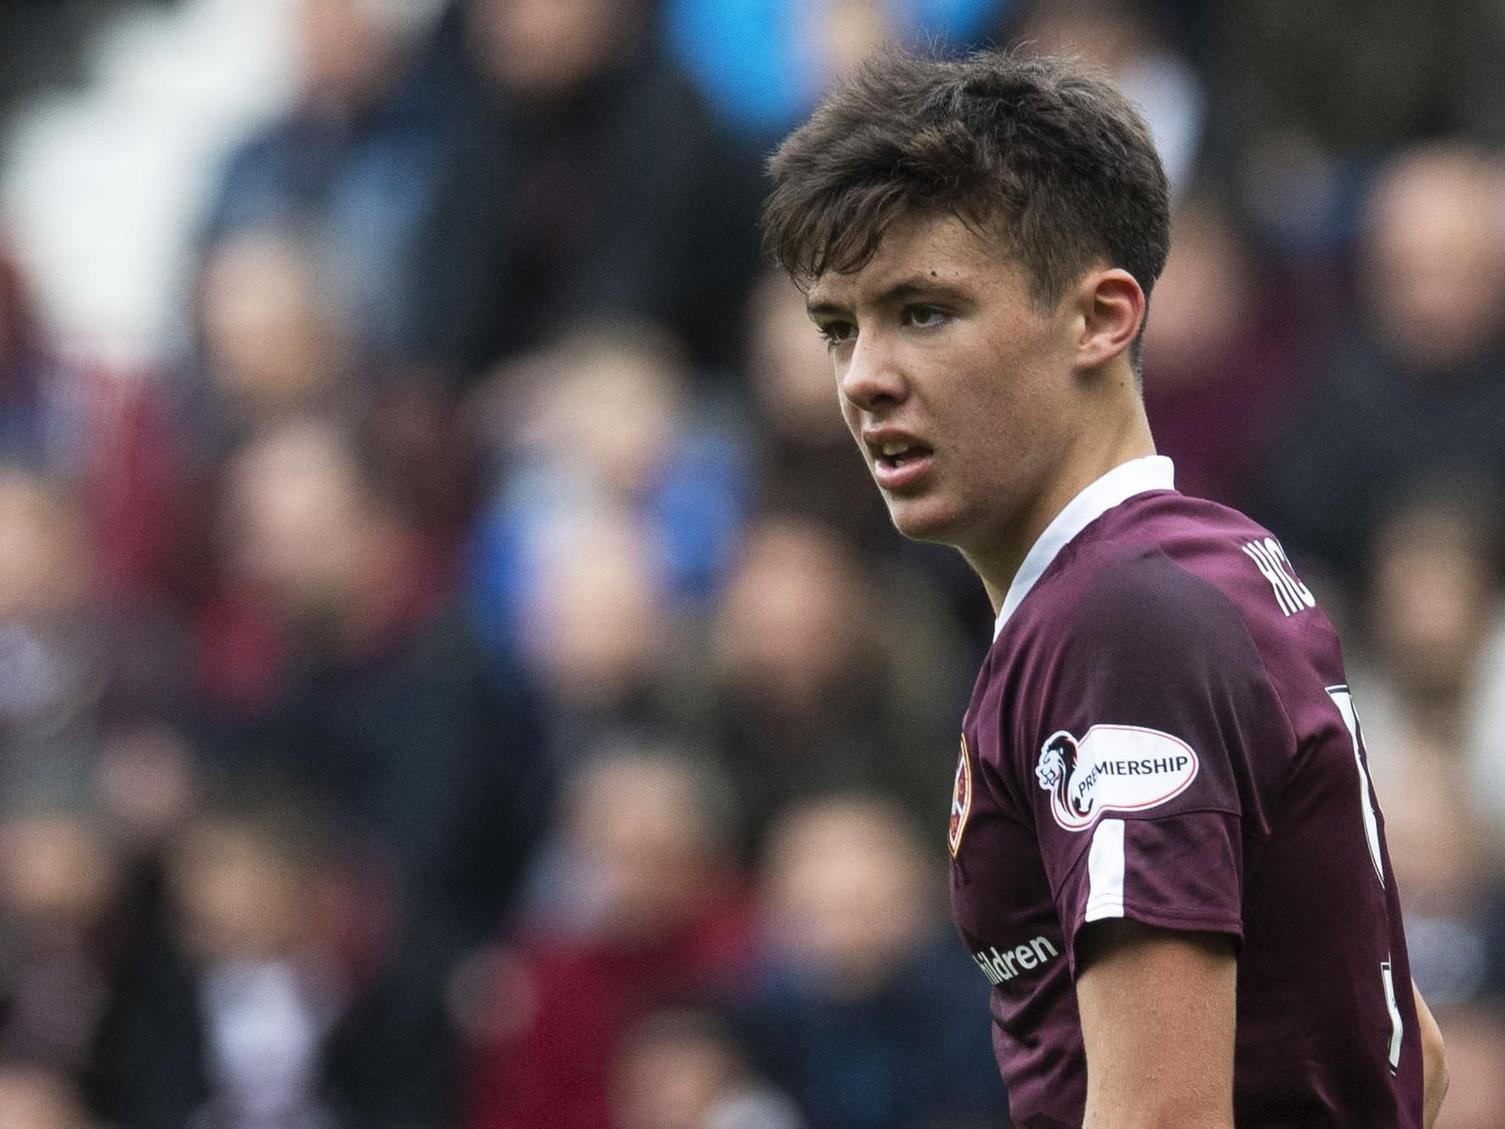 This year has been the stuff of dreams for teenager Hickey, who played for Hearts in the Scottish Cup final at just 16, and since been linked with a move to Man City.